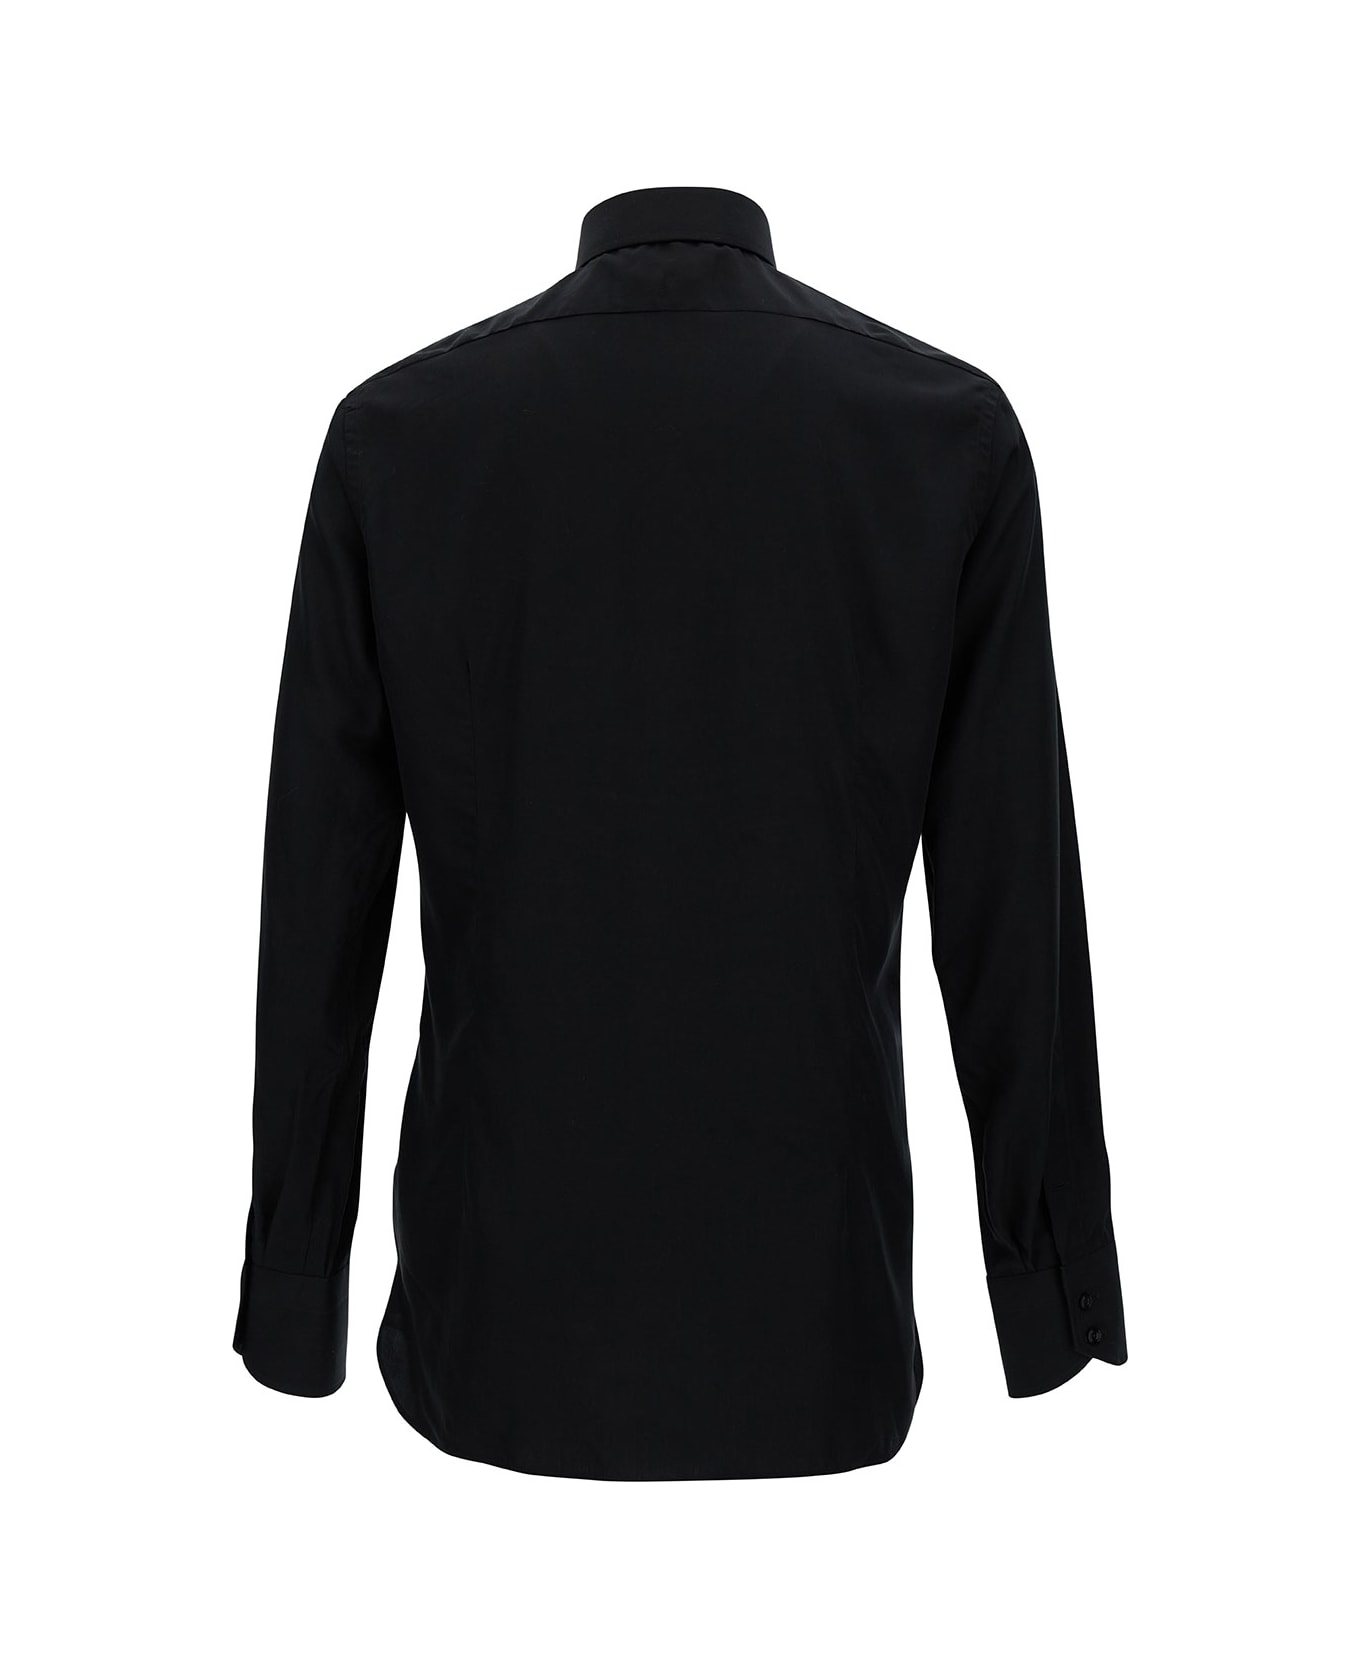 Tom Ford Black Shirt With Pointed Collar In Silk Blend Man - Black